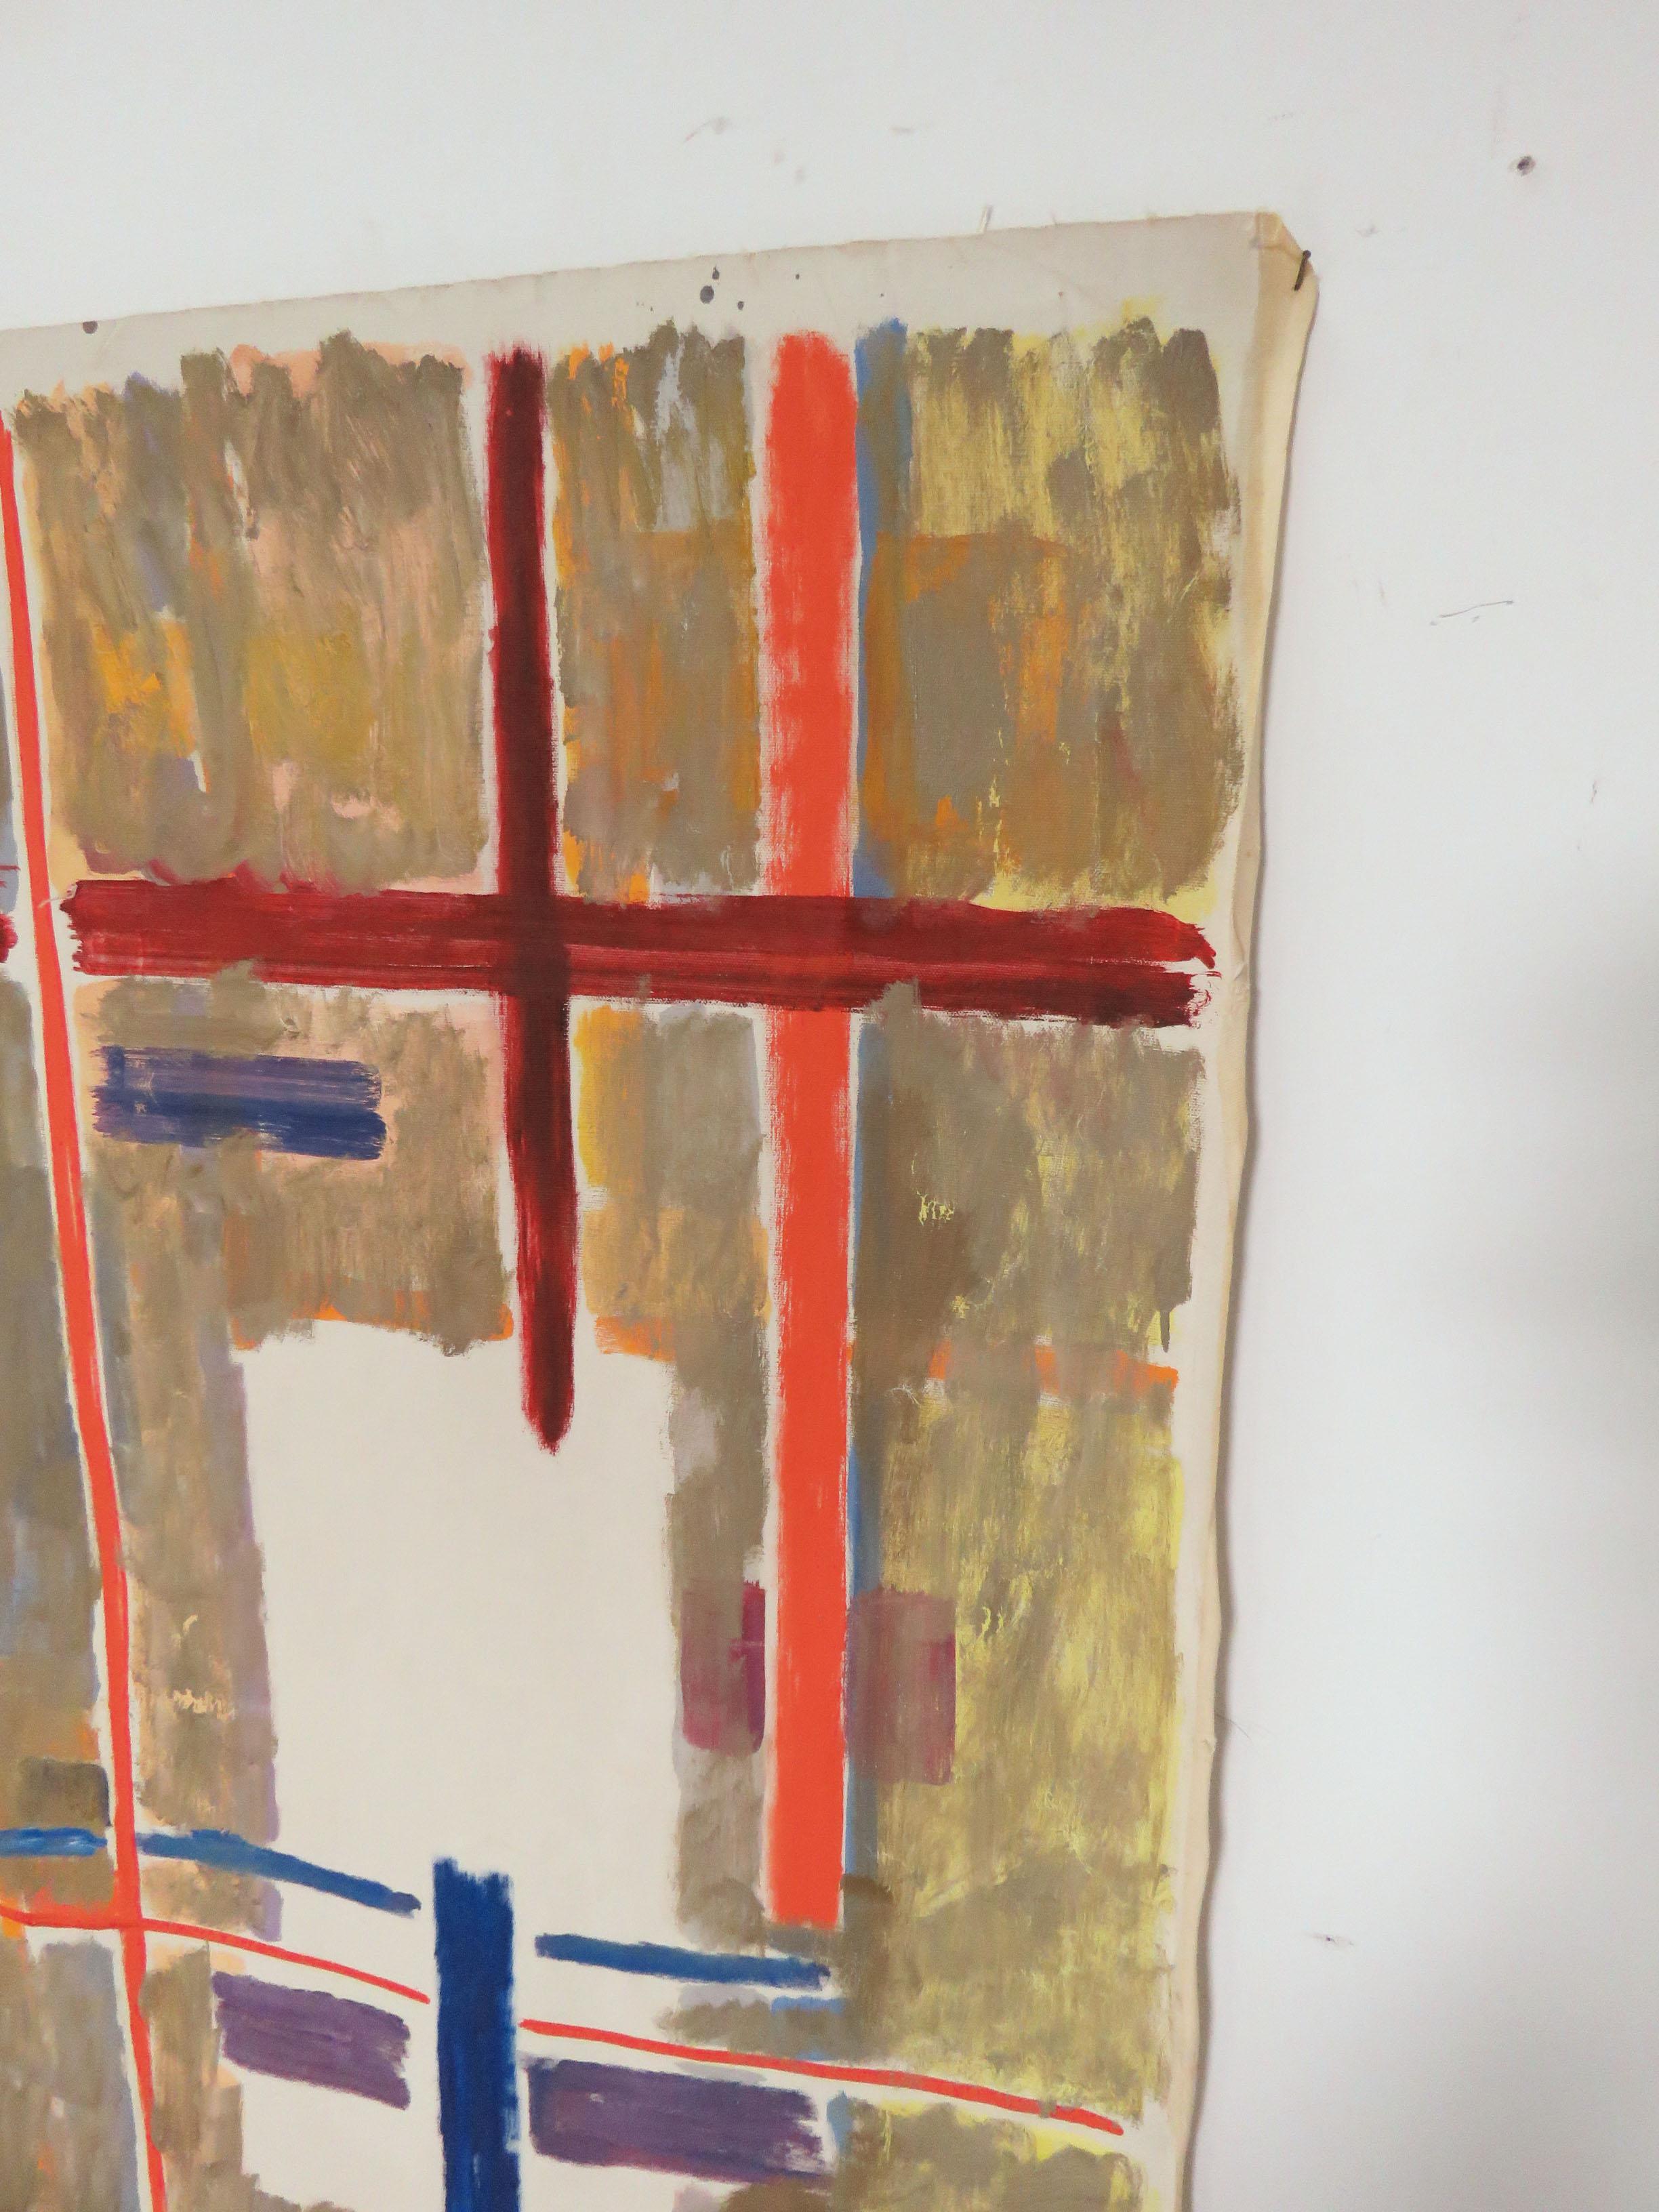 North American Modernist Abstract Painting by Phillip Callahan, circa 1960s